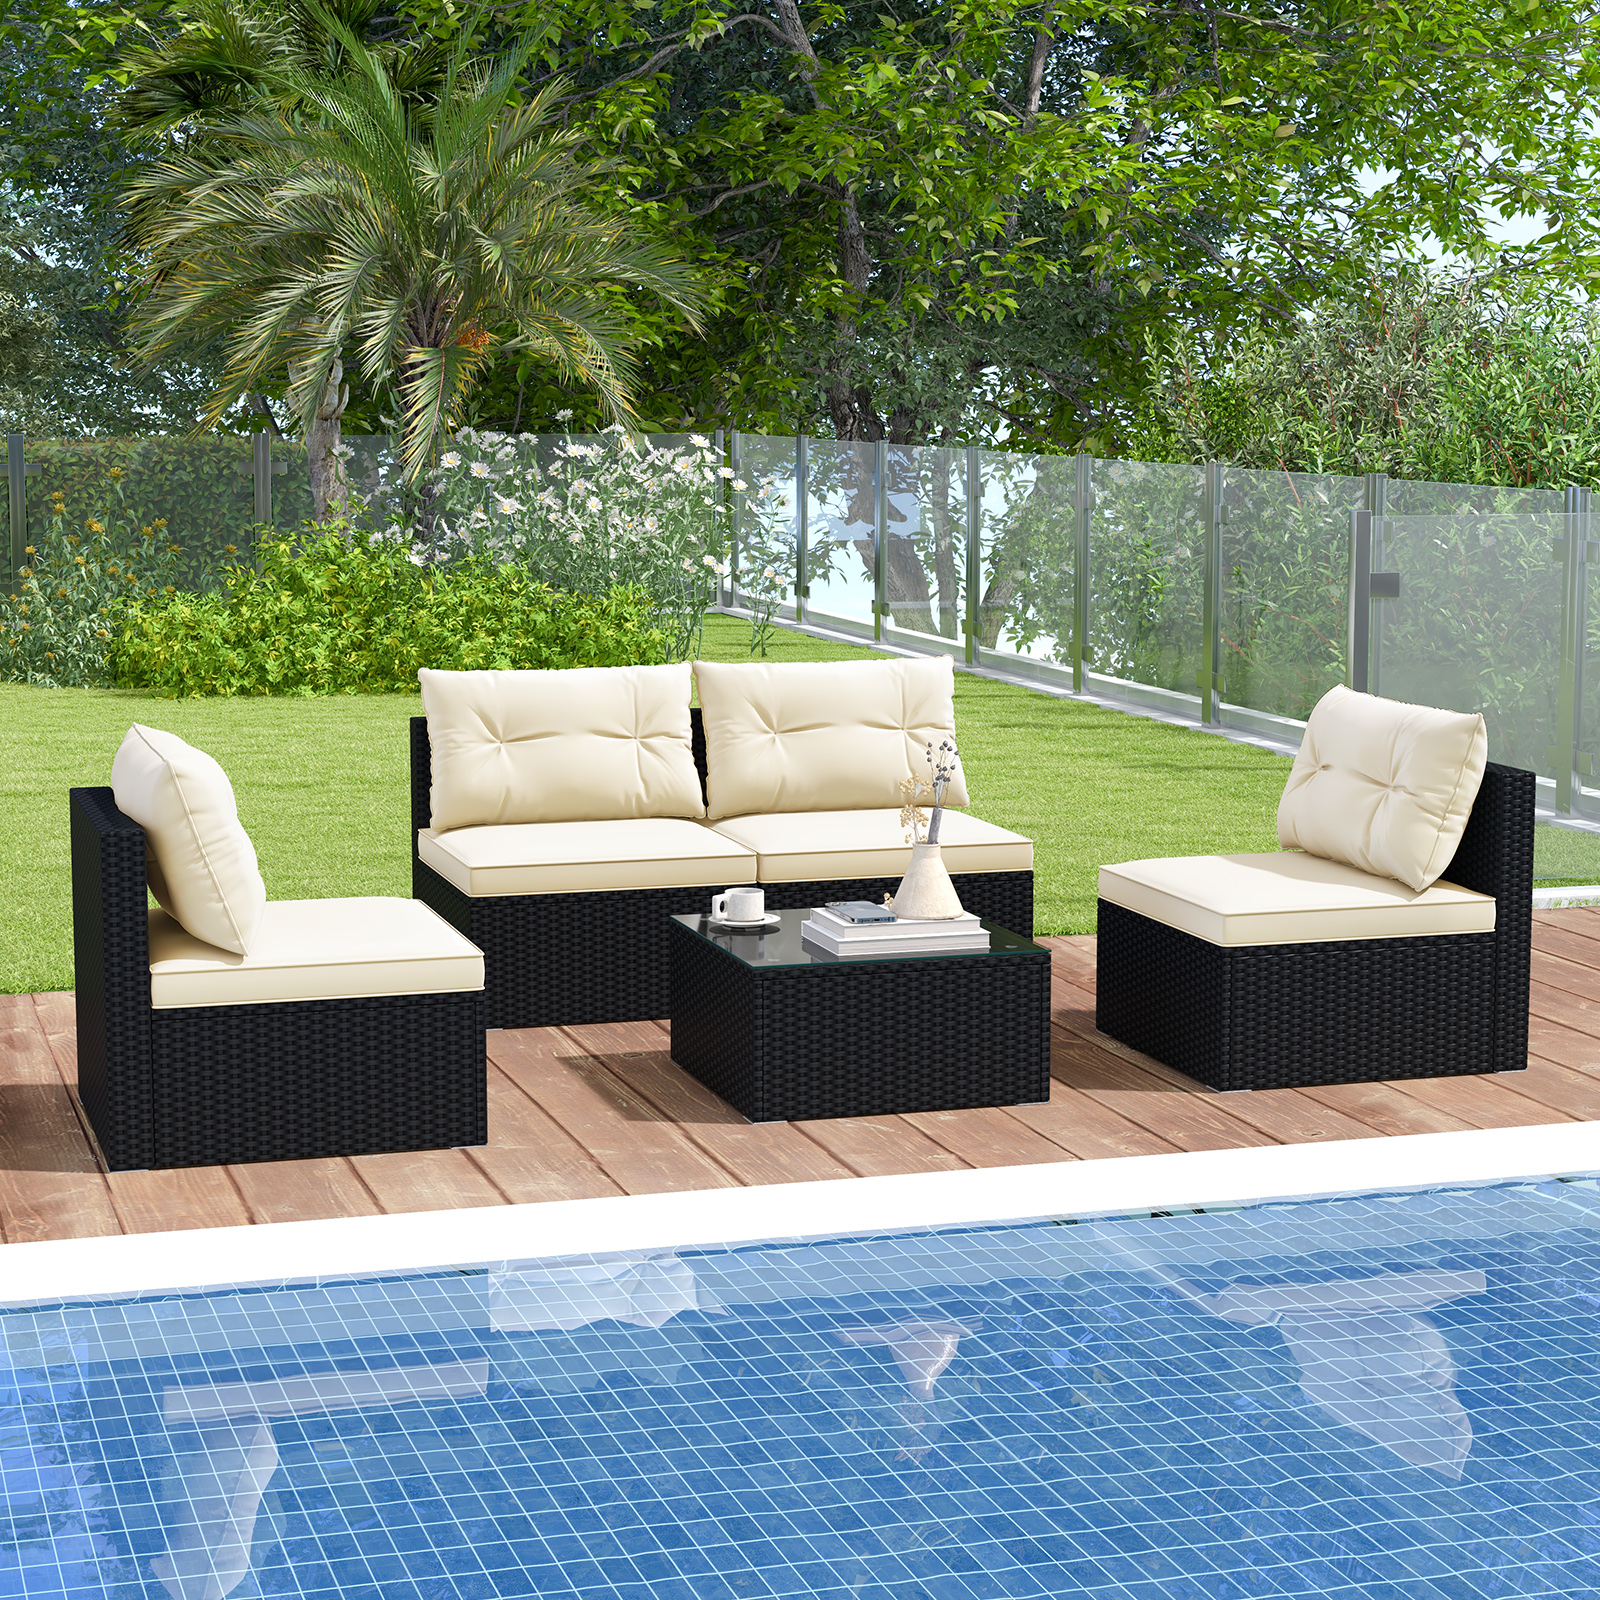 Costway 5 Pieces Outdoor Furniture Set with Seat & Back Cushions Tempered Glass Tabletop